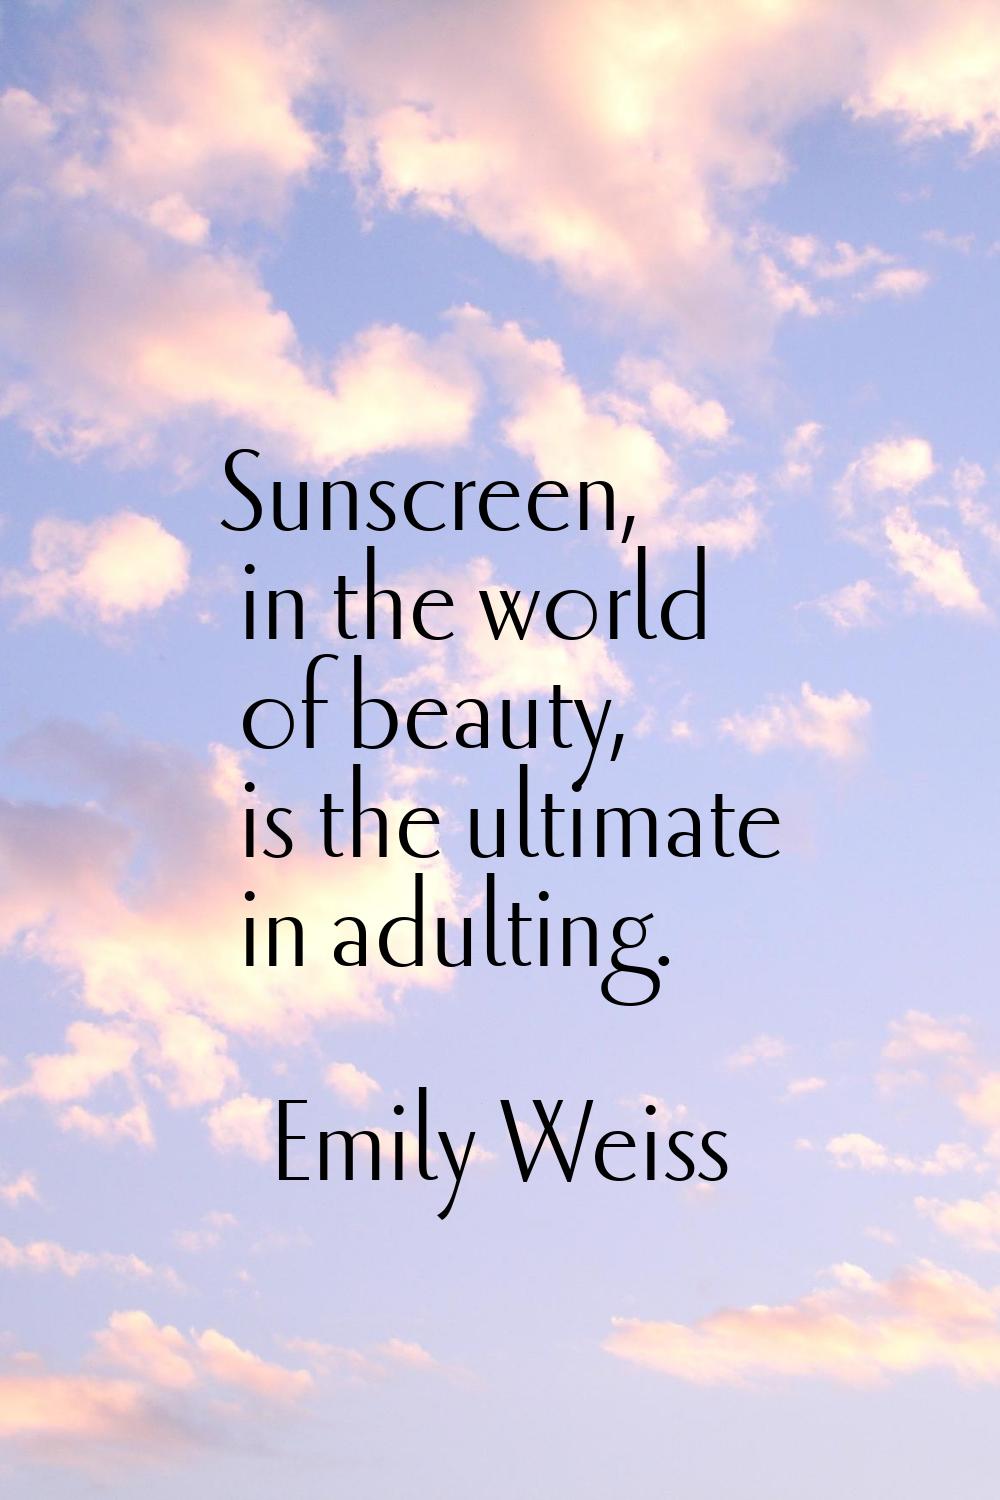 Sunscreen, in the world of beauty, is the ultimate in adulting.